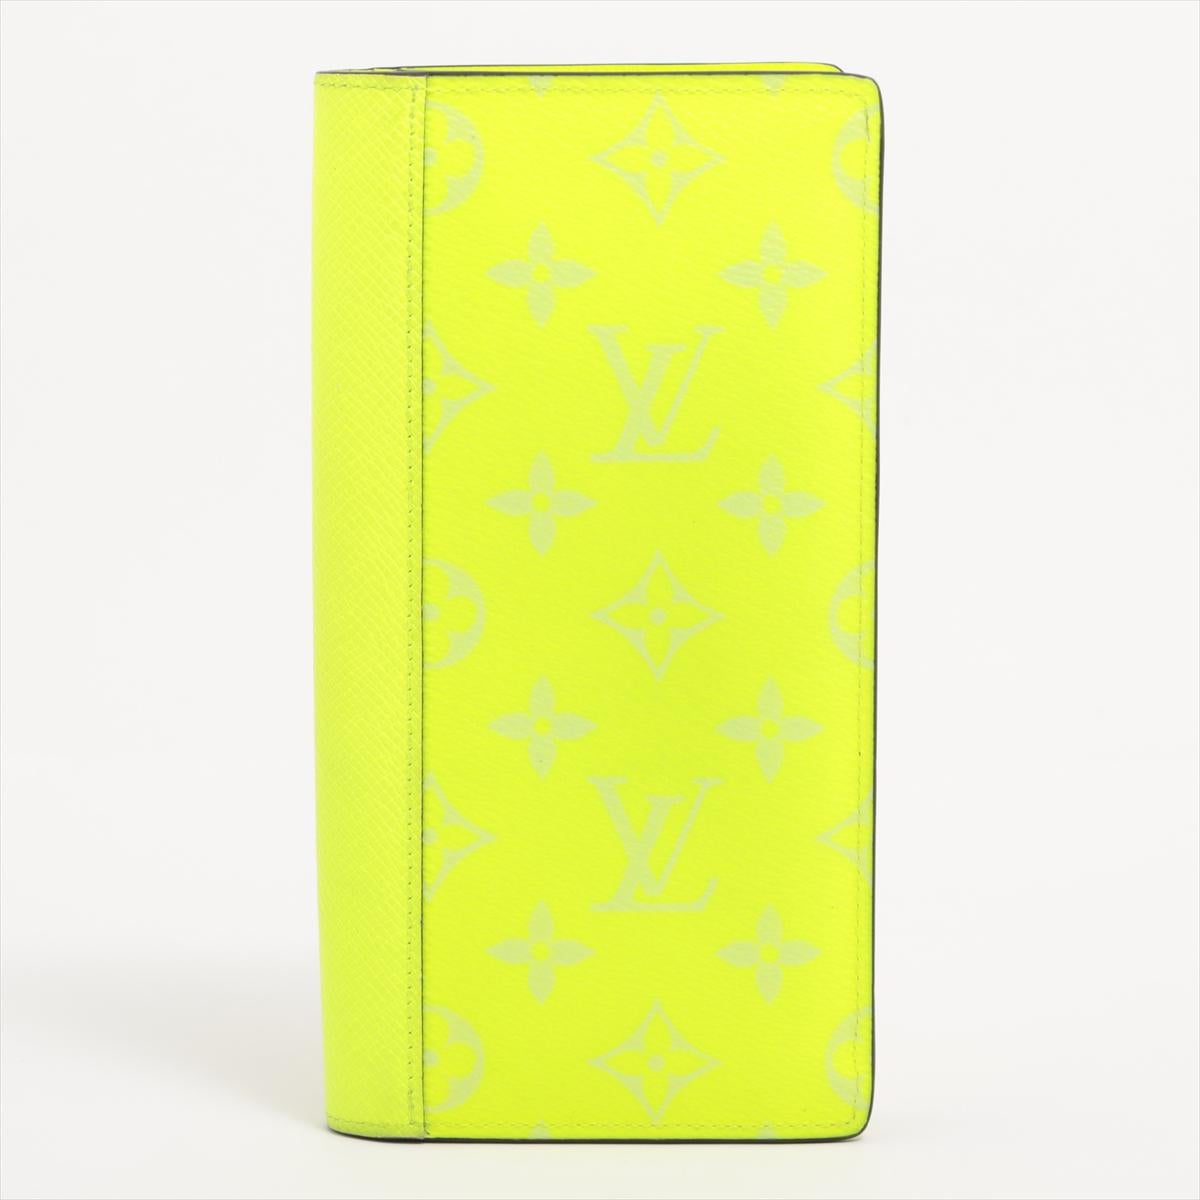 The Louis Vuitton Monogram Brazza Bi-fold Long Wallet in Yellow is a vibrant and luxurious accessory that combines style with practicality. Crafted from the iconic Monogram canvas, the wallet features Louis Vuitton's signature monogram pattern,